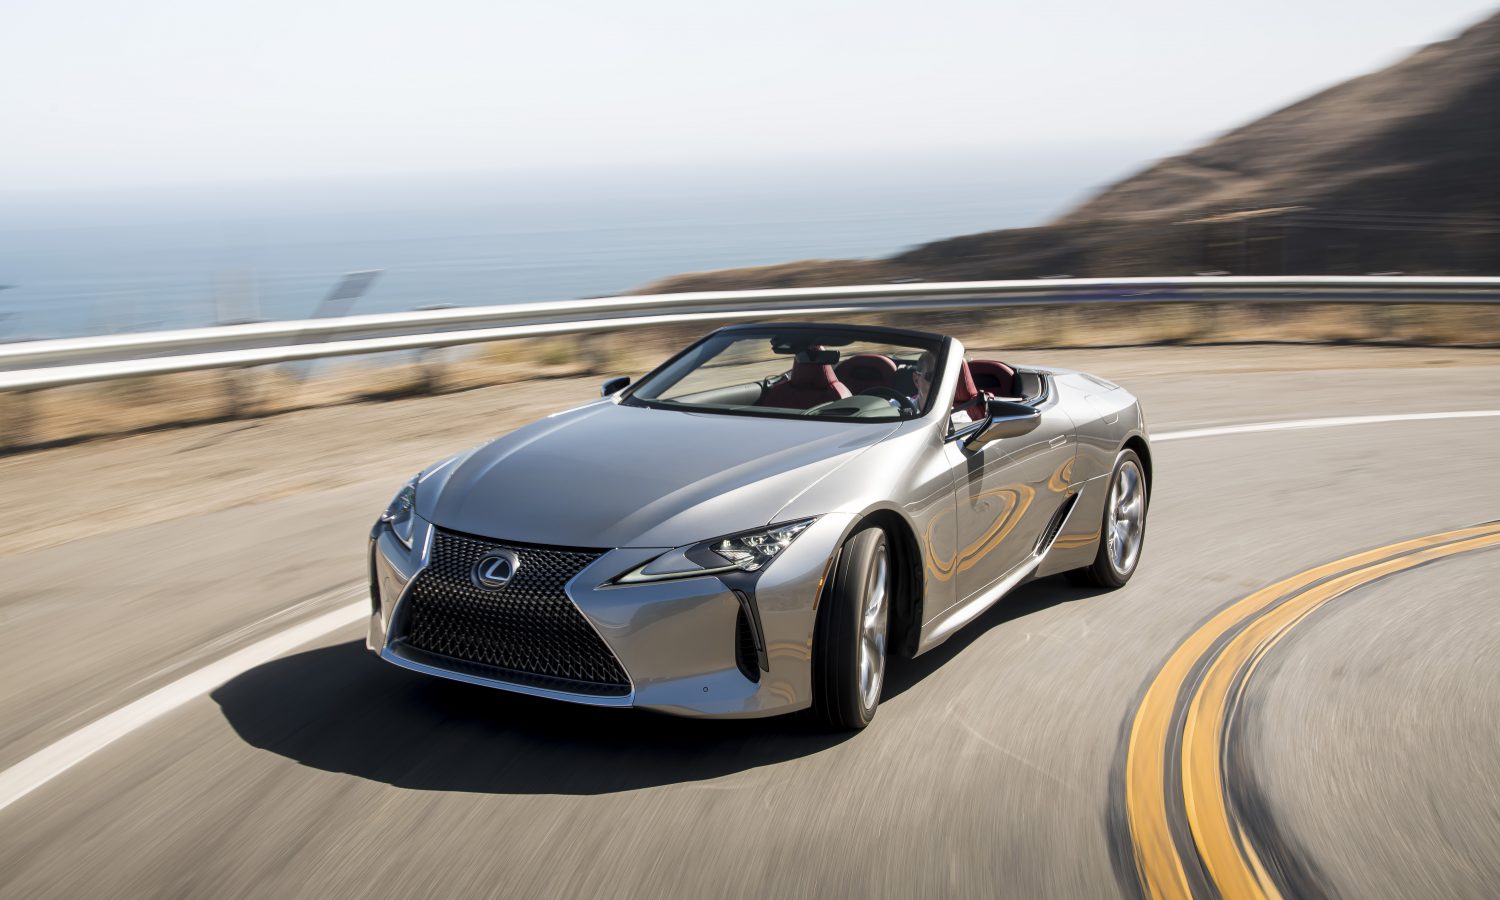 2021 Lexus LC 500 Convertible Opens Possibilities for Flagship Performance  - Lexus USA Newsroom